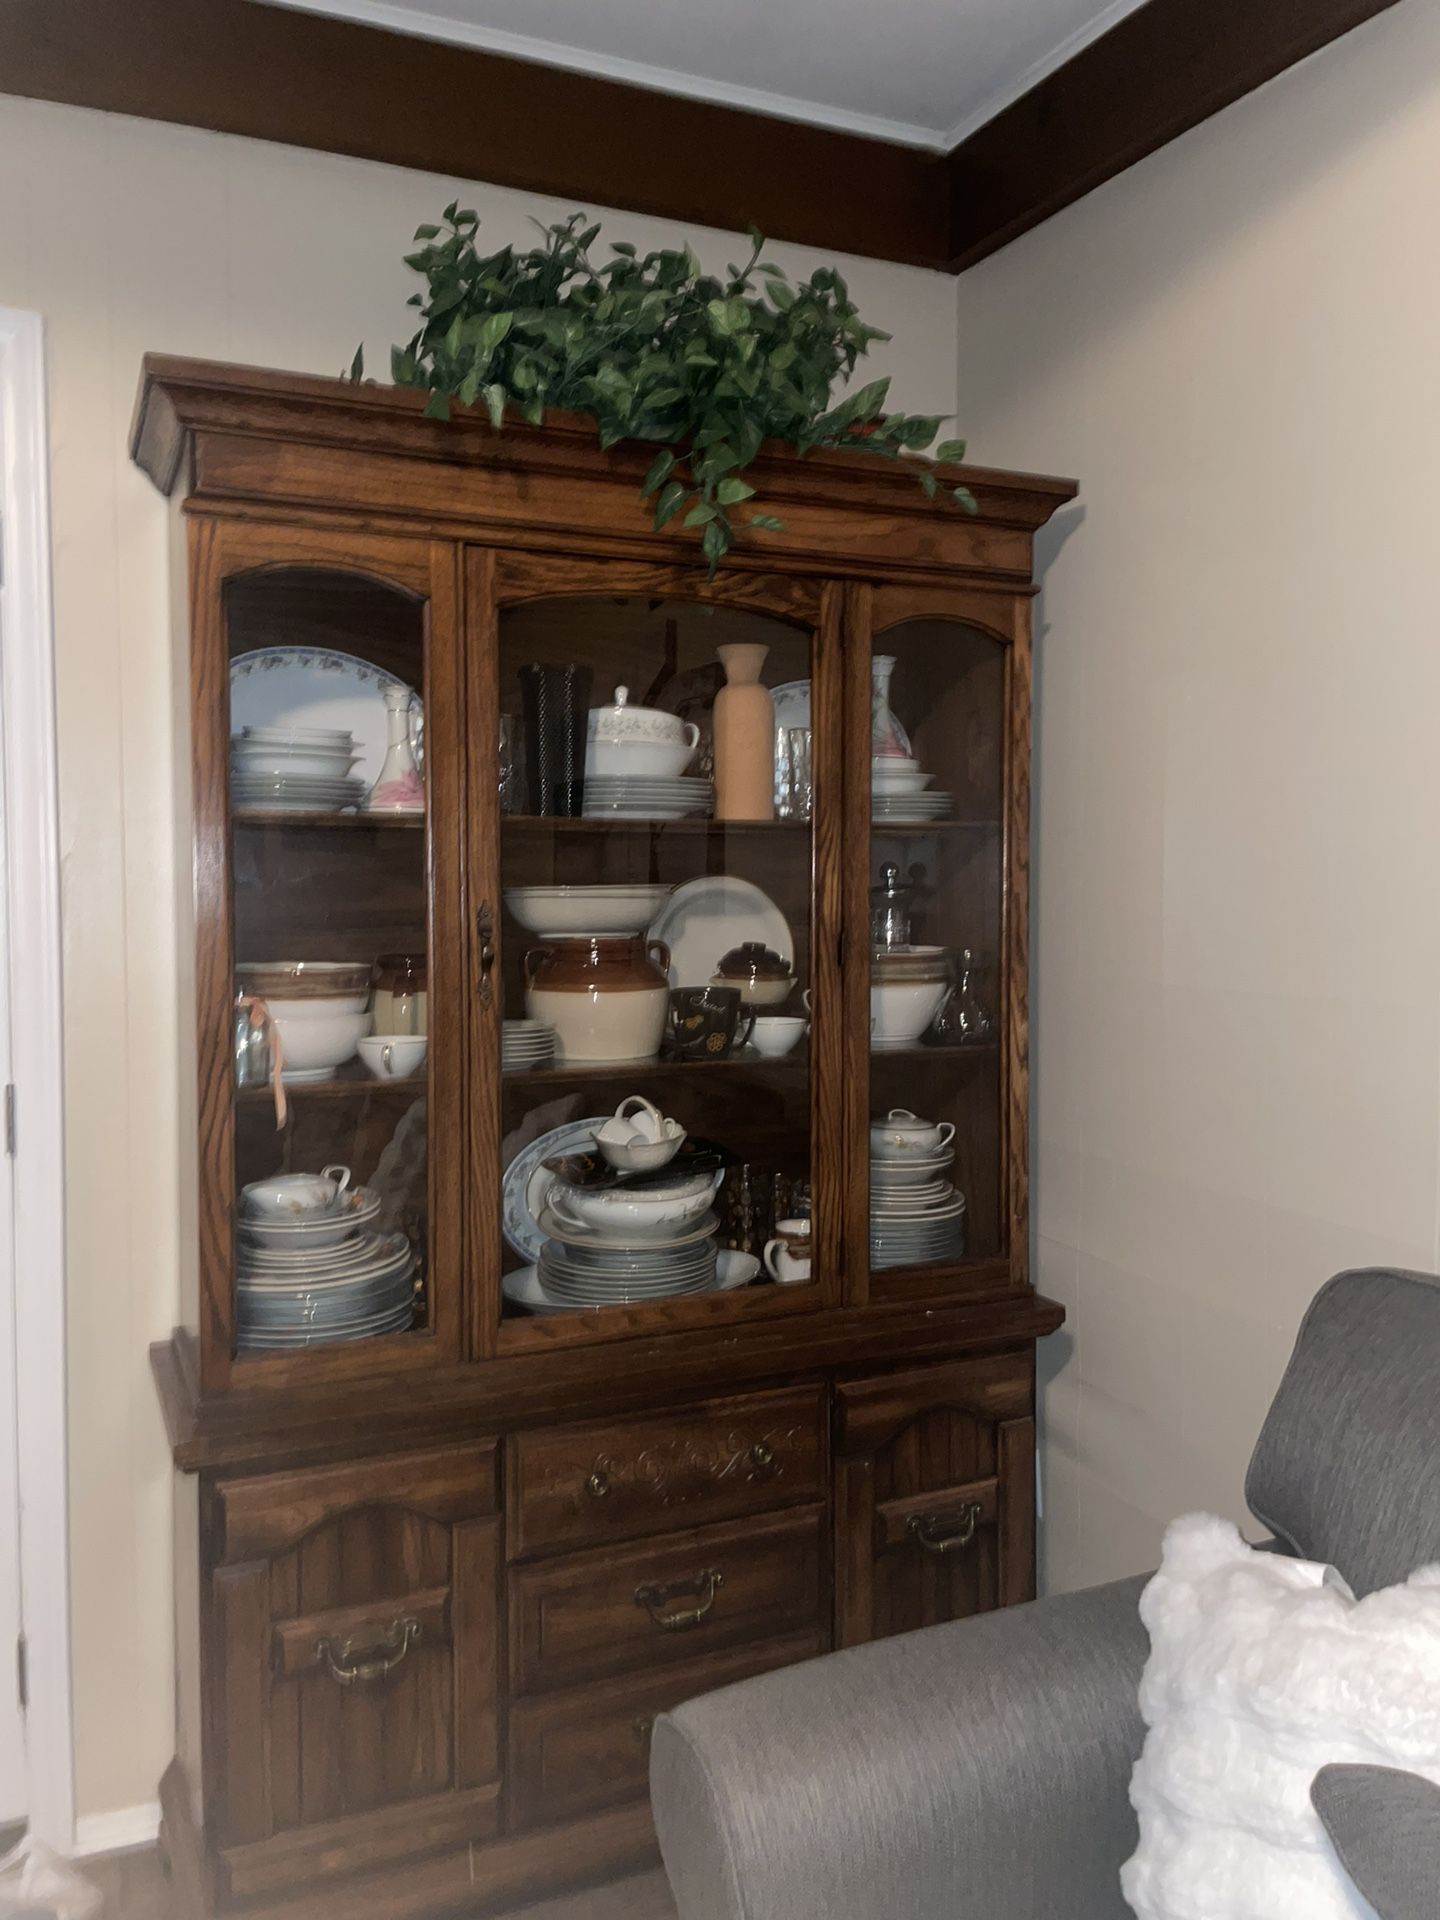 🌟 Antique China Cabinet and Buffet with Lights! 🌟